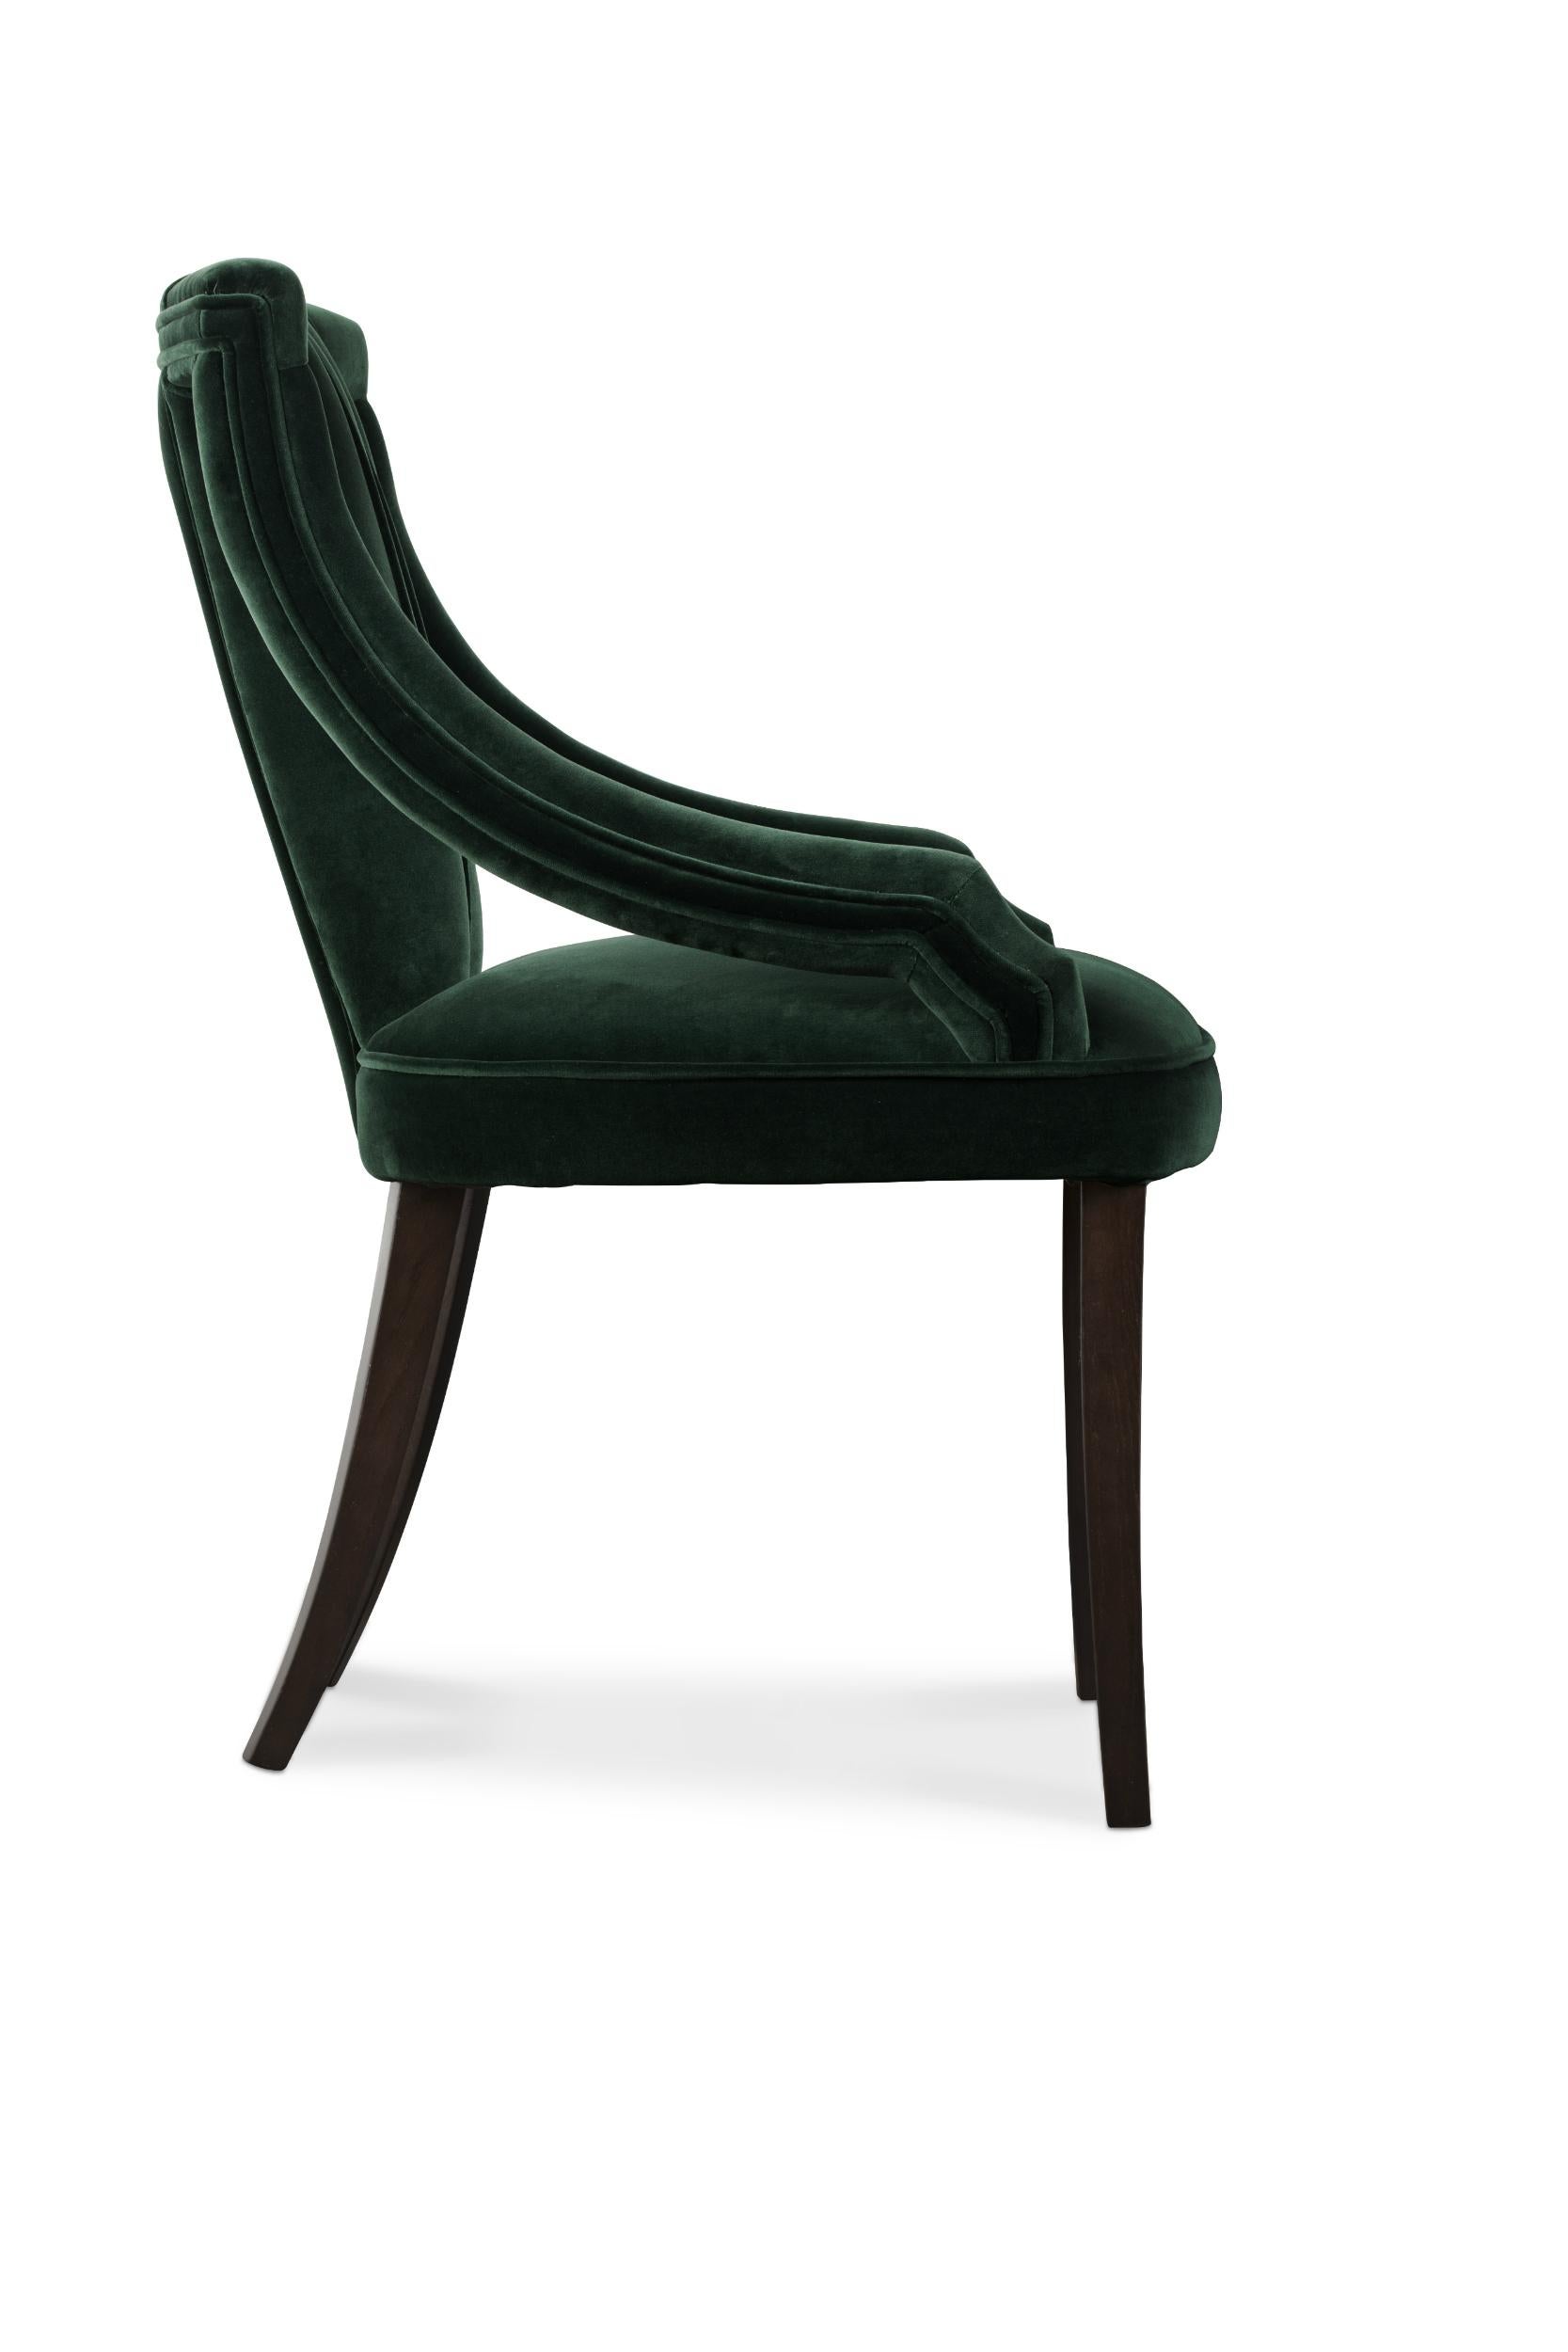 Modern Cayo Dining Chair in Cotton Velvet with Wood Legs by Brabbu
This modern dining chair, Cayo is an elegant and luxurious seating chair by Brabbu in green and forest tones made in velvet. This modern dining chair is perfect for any dining room